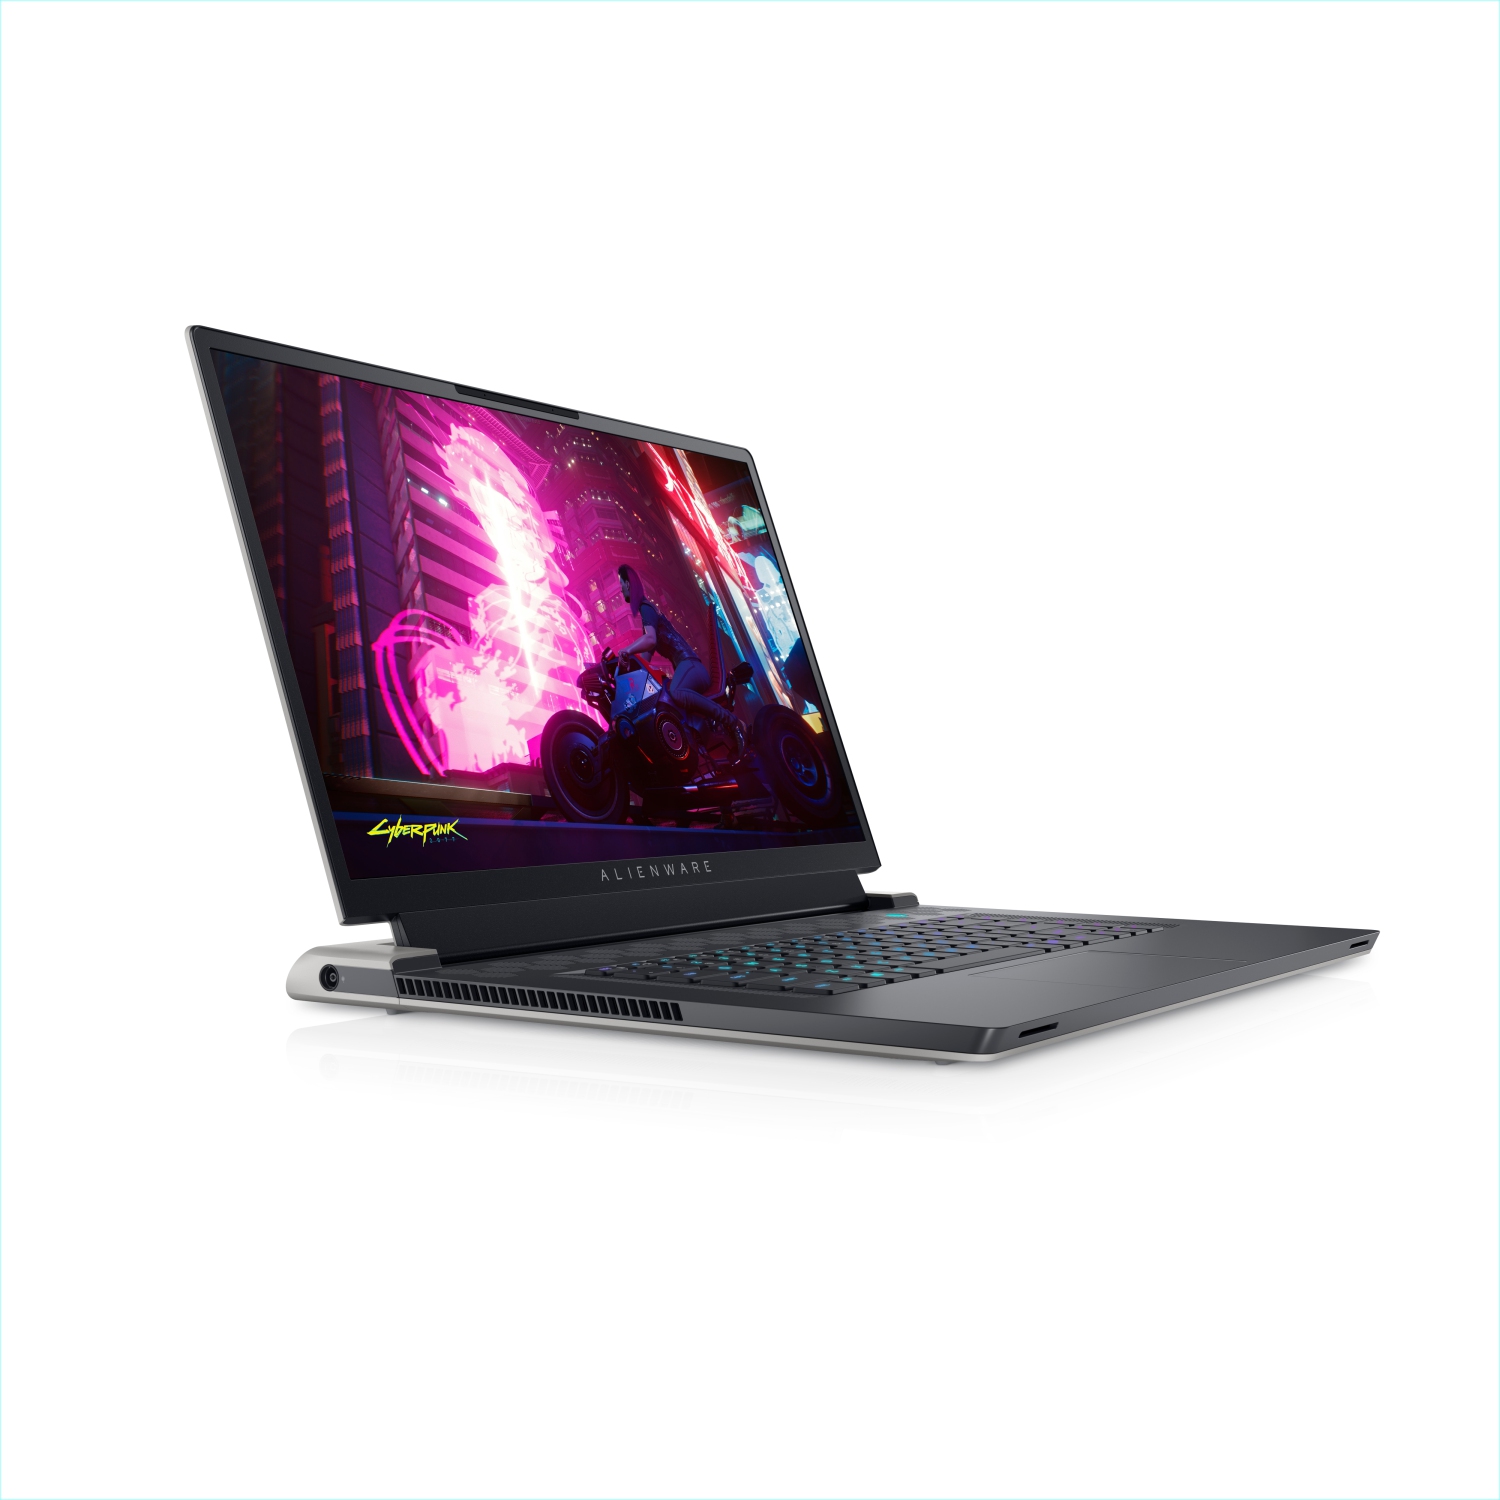 Refurbished (Excellent) - Dell Alienware X17 R1 Gaming Laptop (2021), 17.3" FHD, Core i7 - 256GB SSD + 256GB SSD - 16GB RAM - RTX 3080, 4.6 GHz - 11th Gen CPU Certified